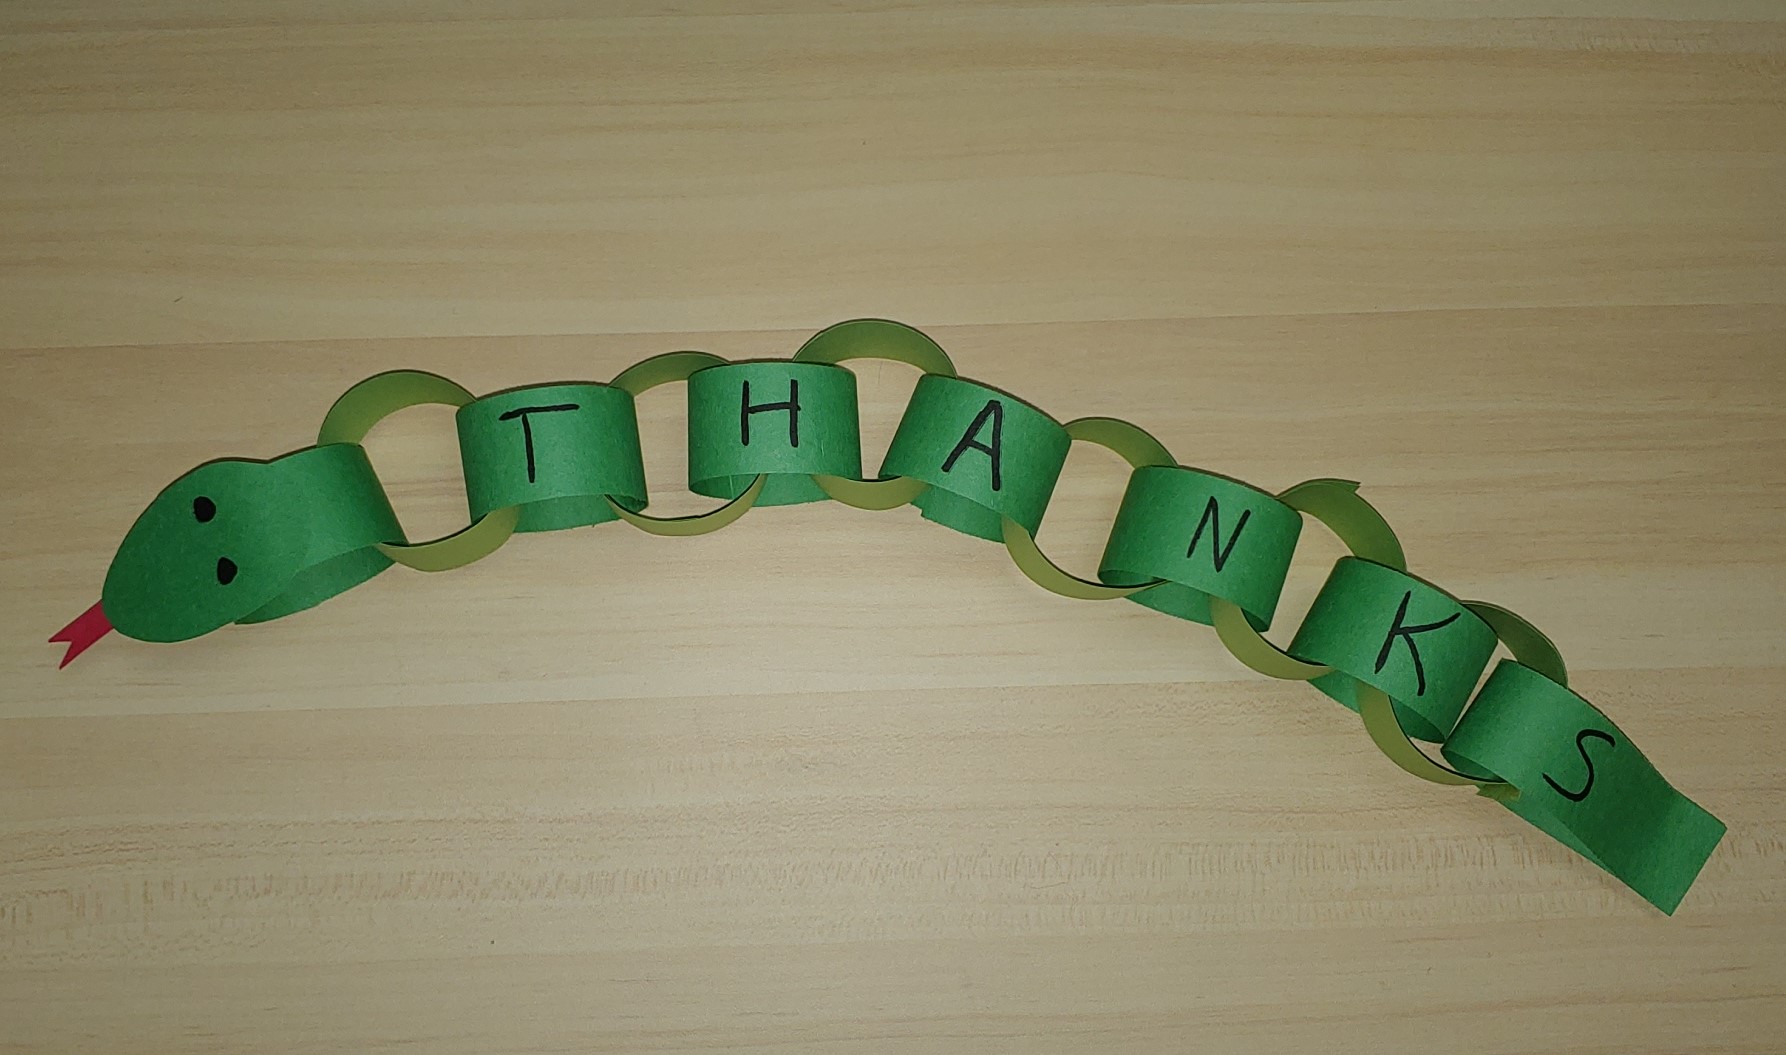 Snake made from green paper chains